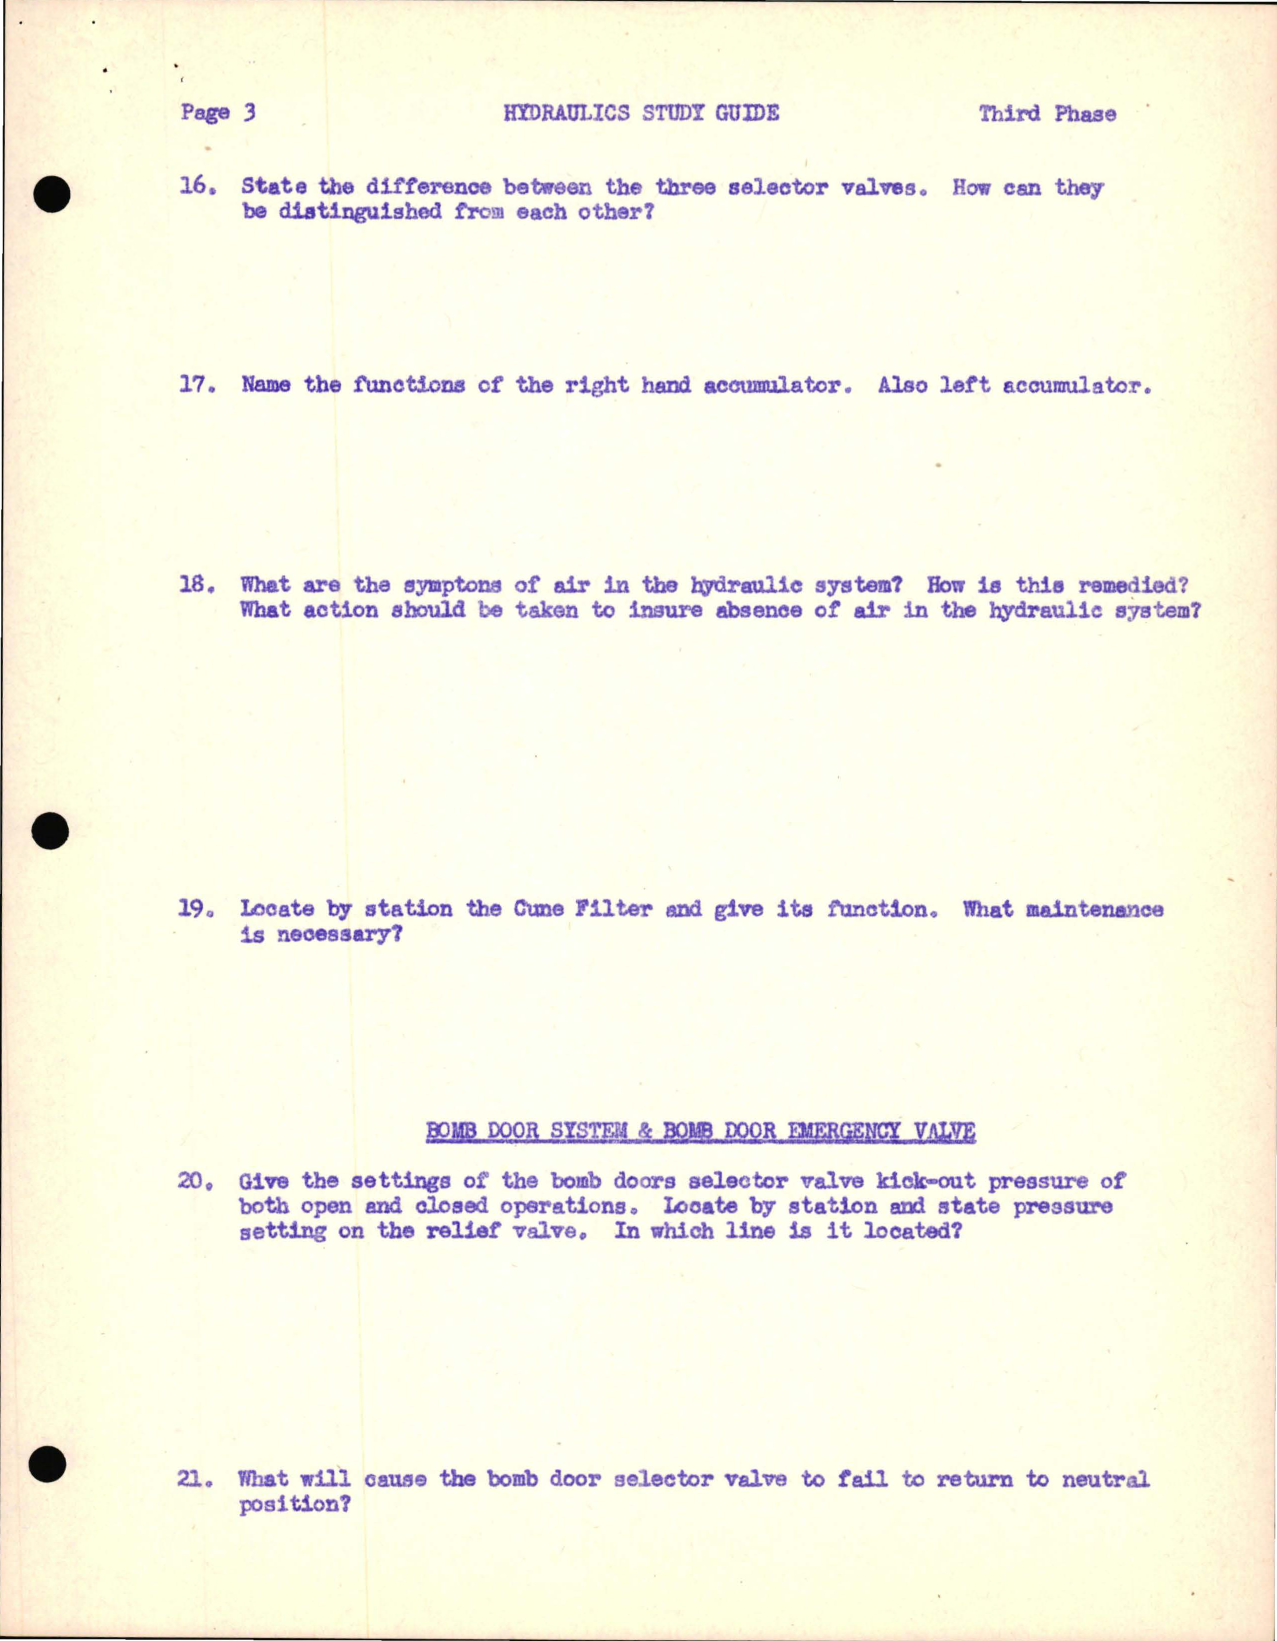 Sample page 7 from AirCorps Library document: Study Guide for Hydraulics, Consolidated Aircraft - Third Phase